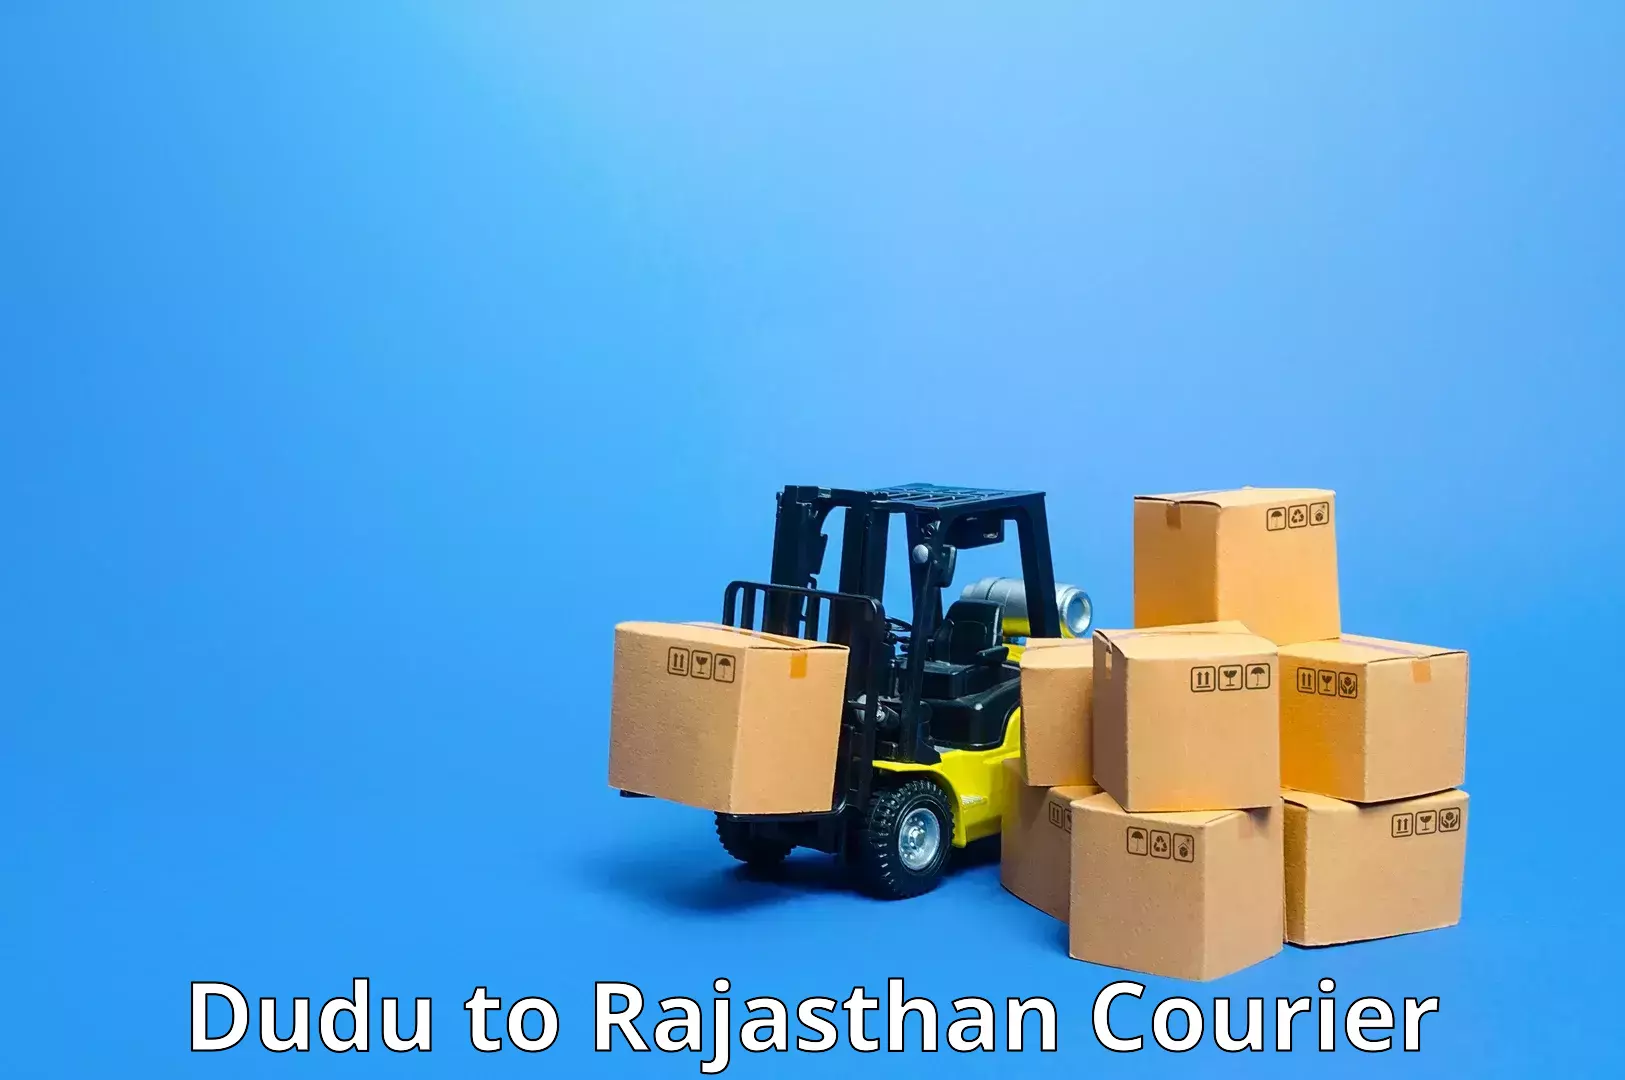 Round-the-clock parcel delivery Dudu to Dhorimana